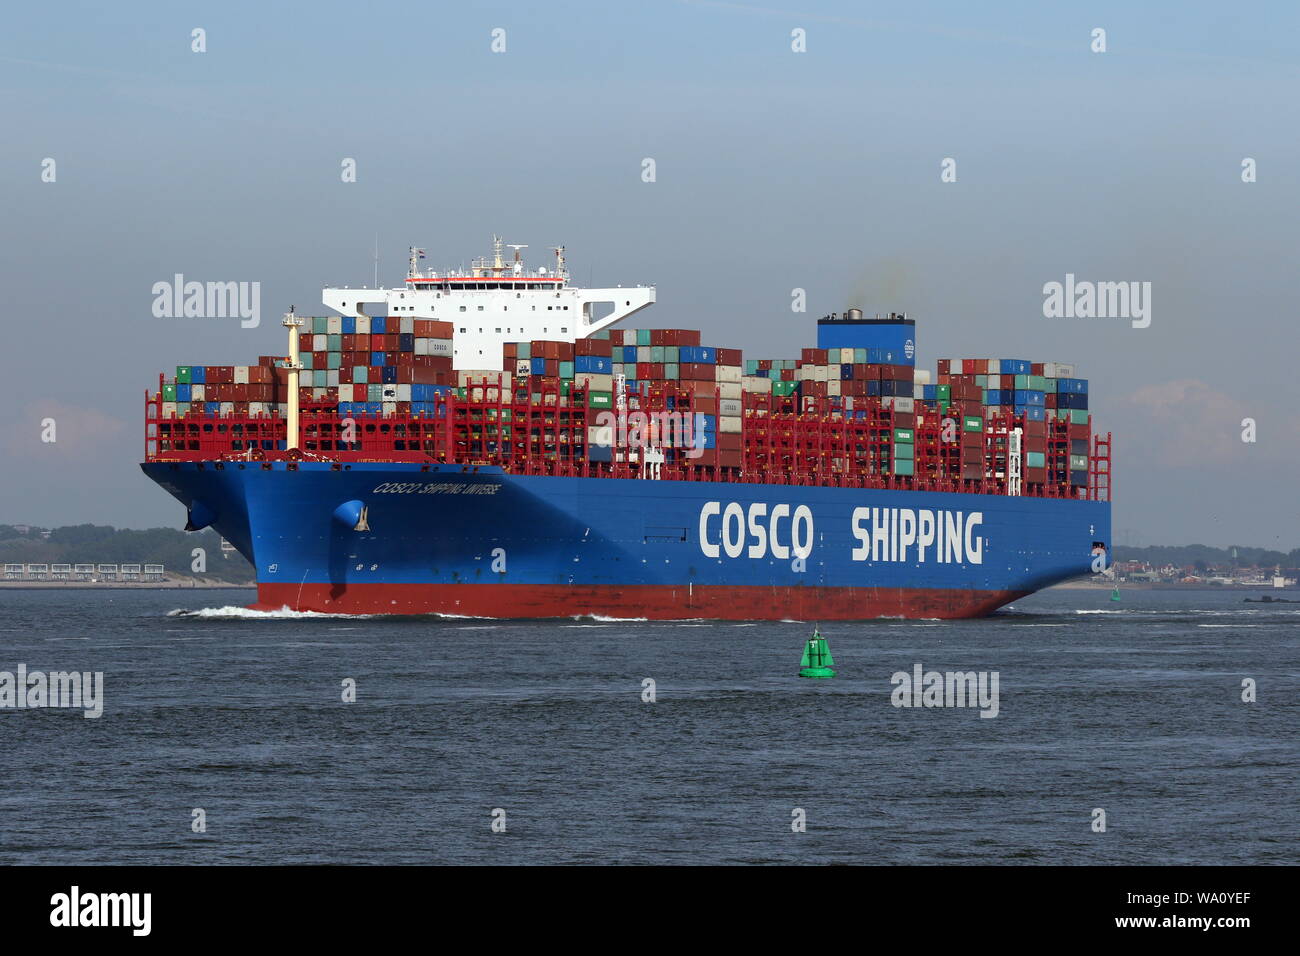 The container ship COSCO Shipping Universe leaves the port of Rotterdam on 22 May 2019. Stock Photo